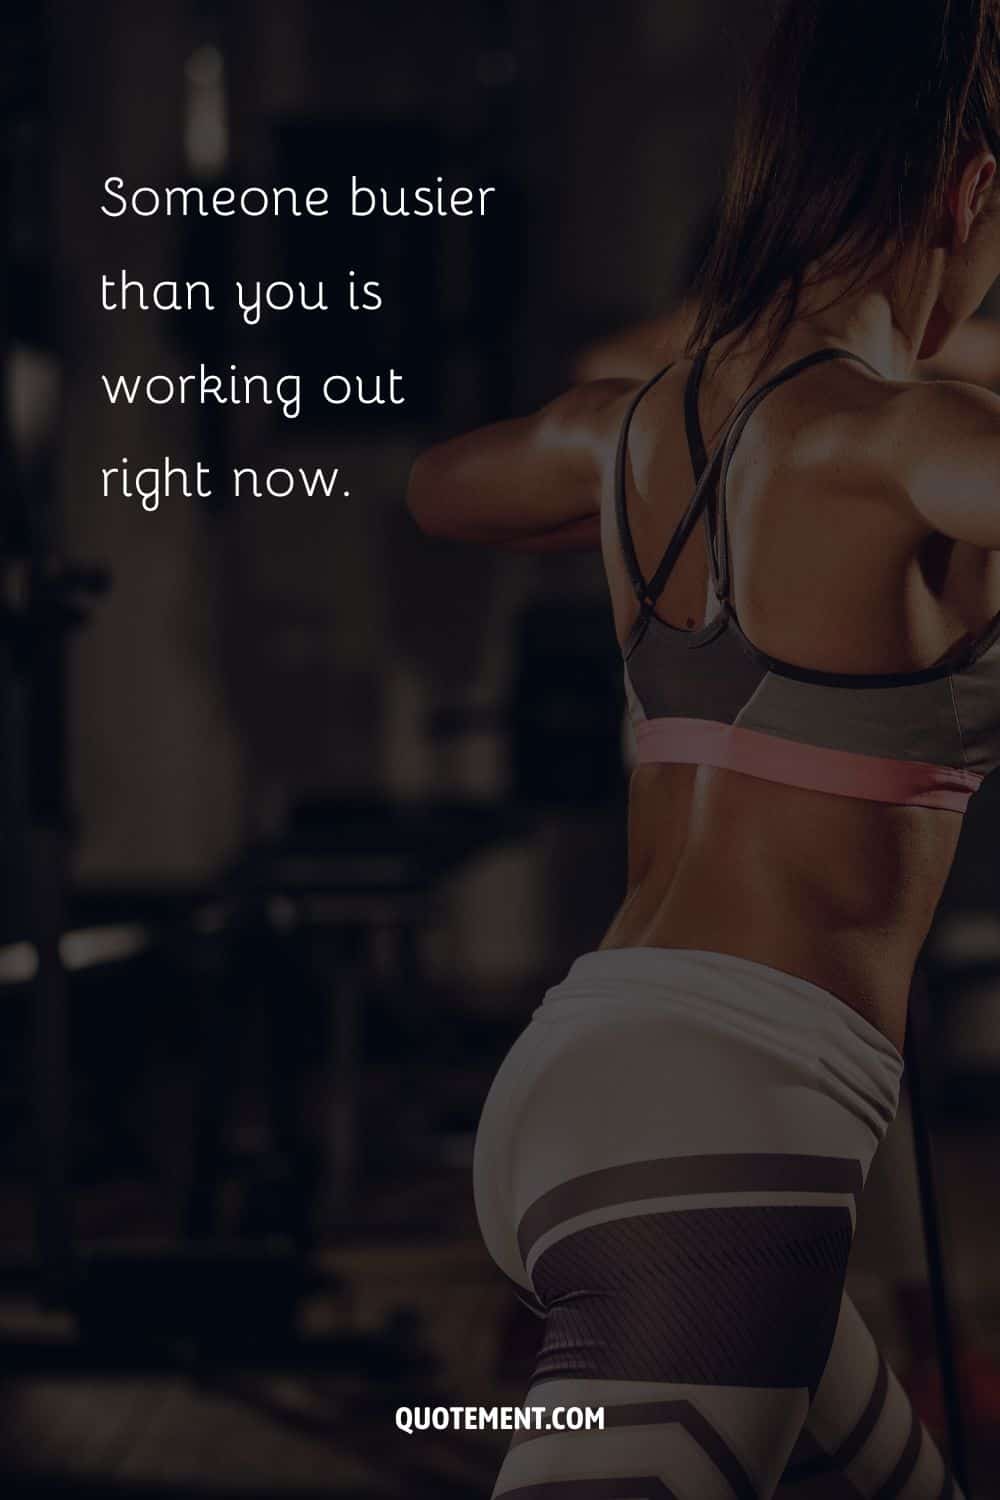 Someone busier than you is working out right now